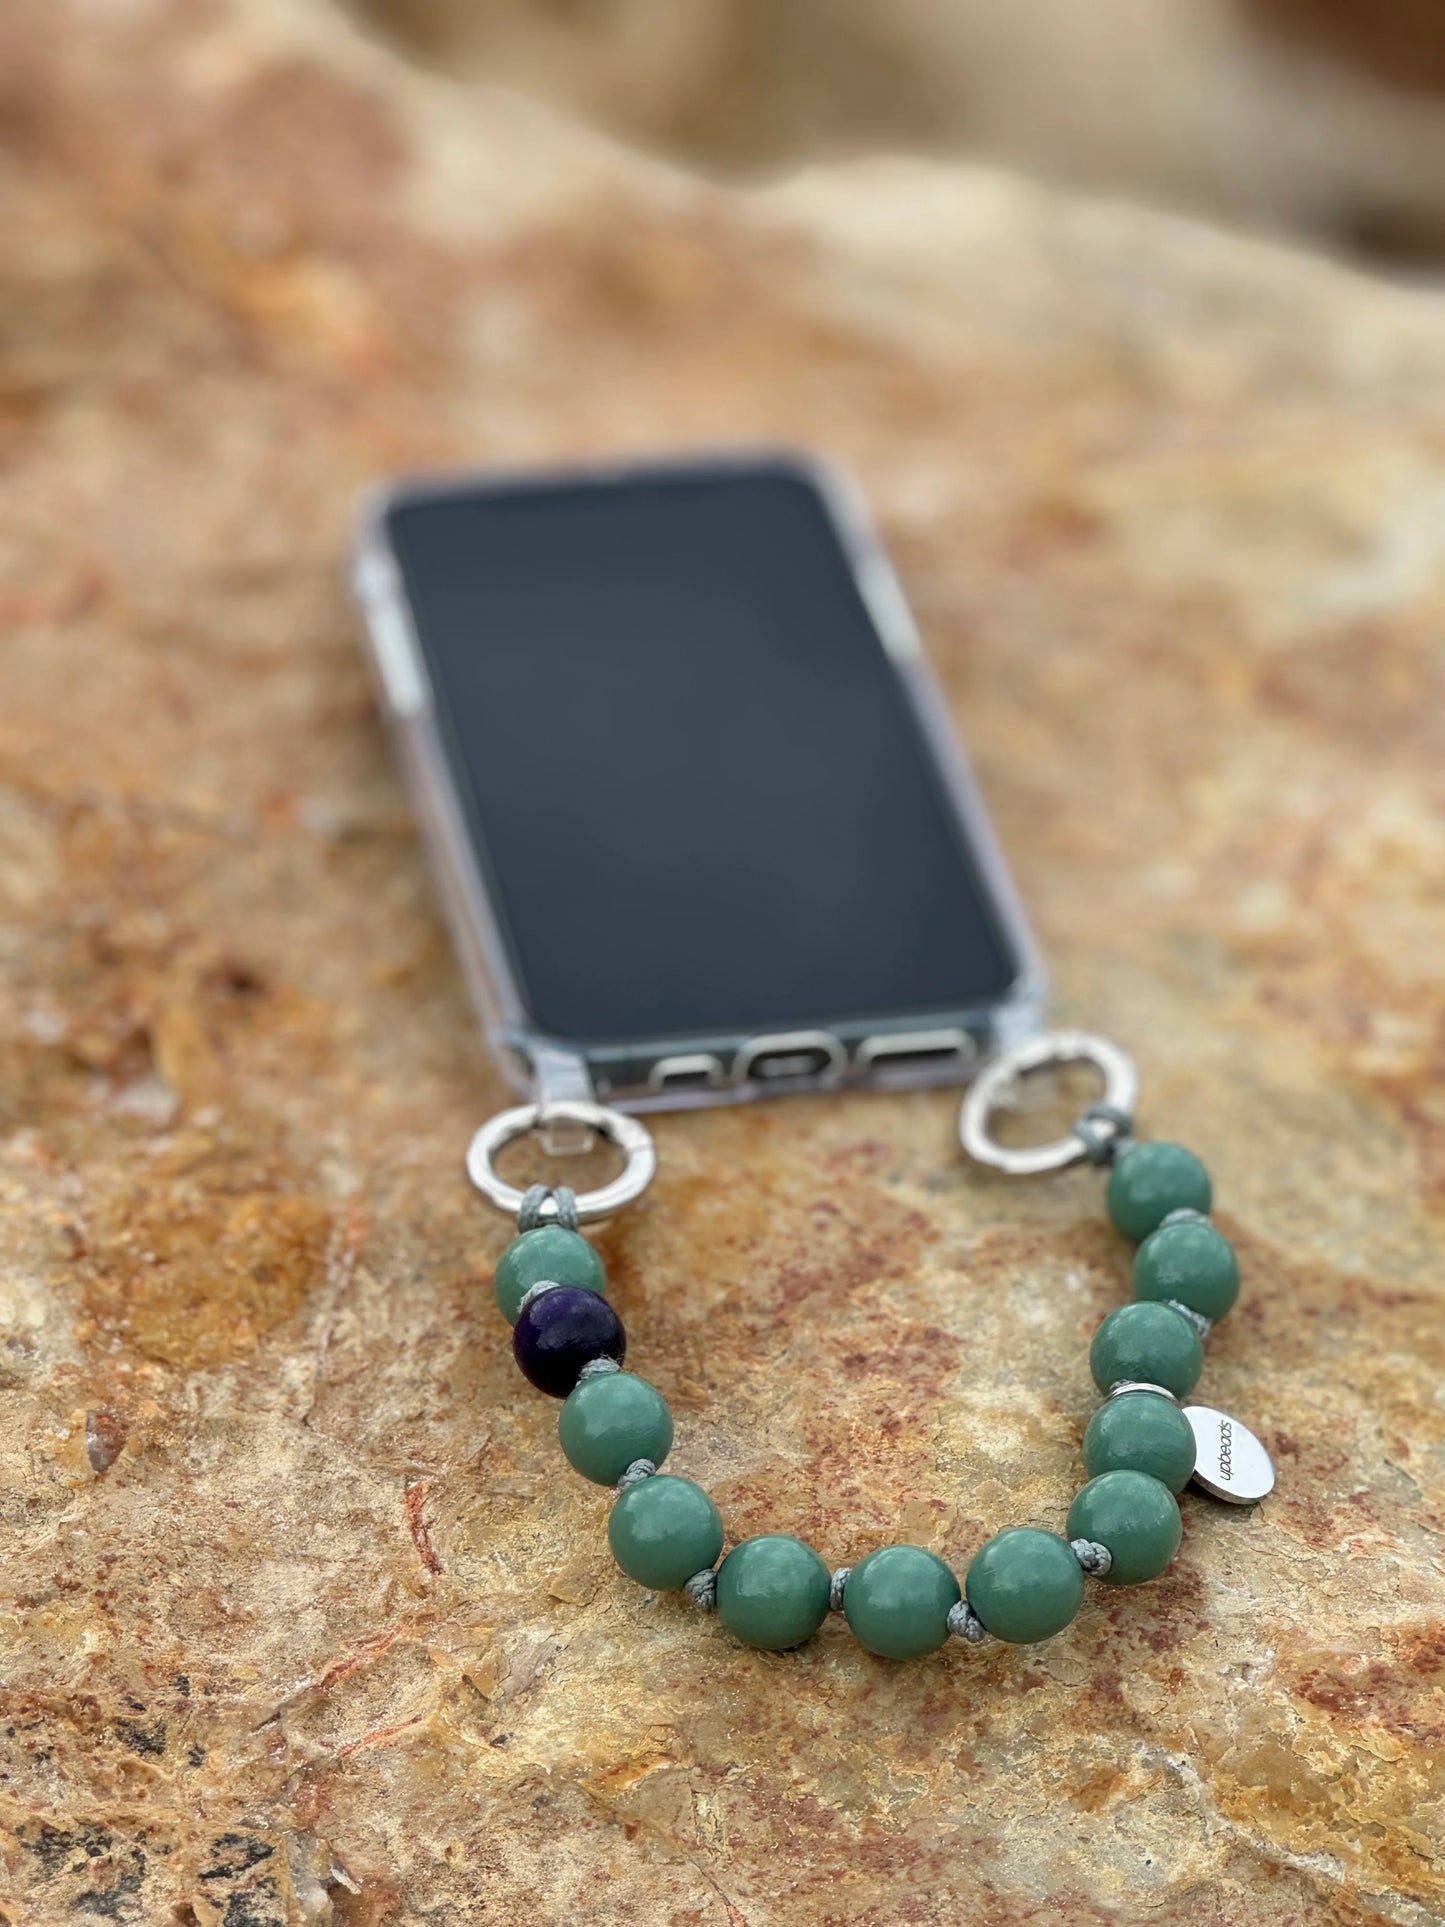 upbeads sage mini green upbeads cellphone keychain click in